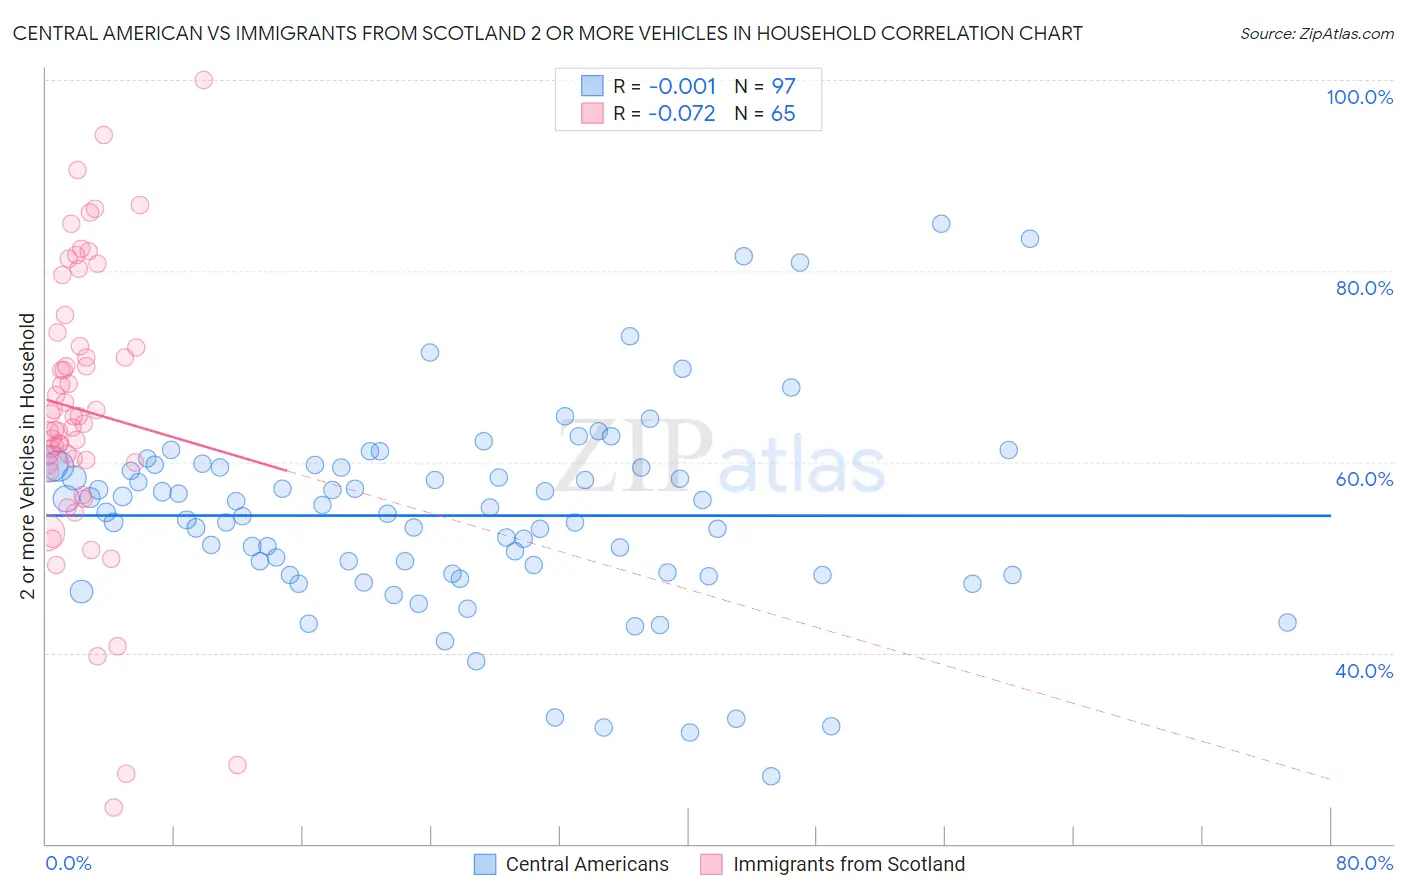 Central American vs Immigrants from Scotland 2 or more Vehicles in Household